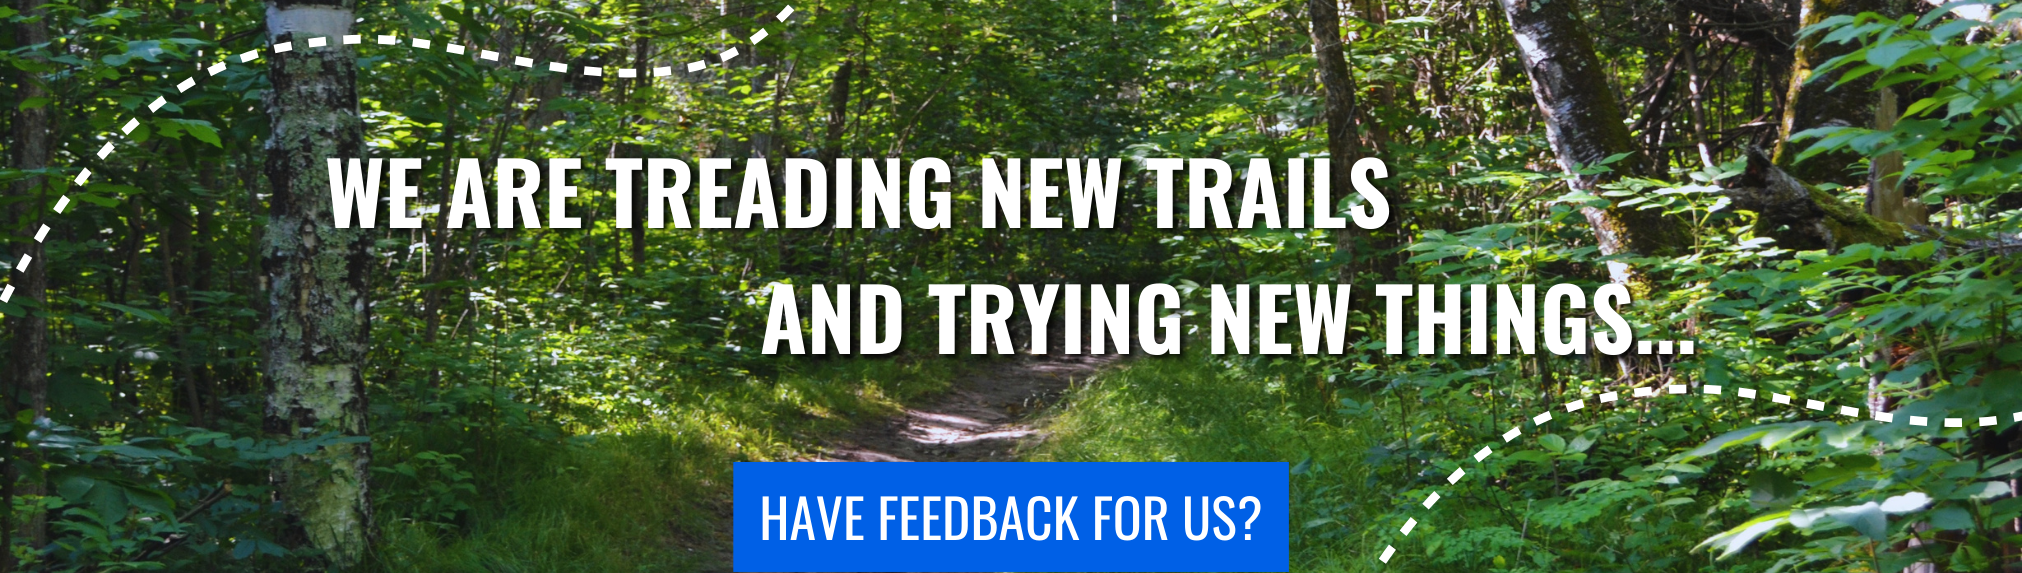 We are treading new trails and trying new things with this new website. Do you have some feedback for us?